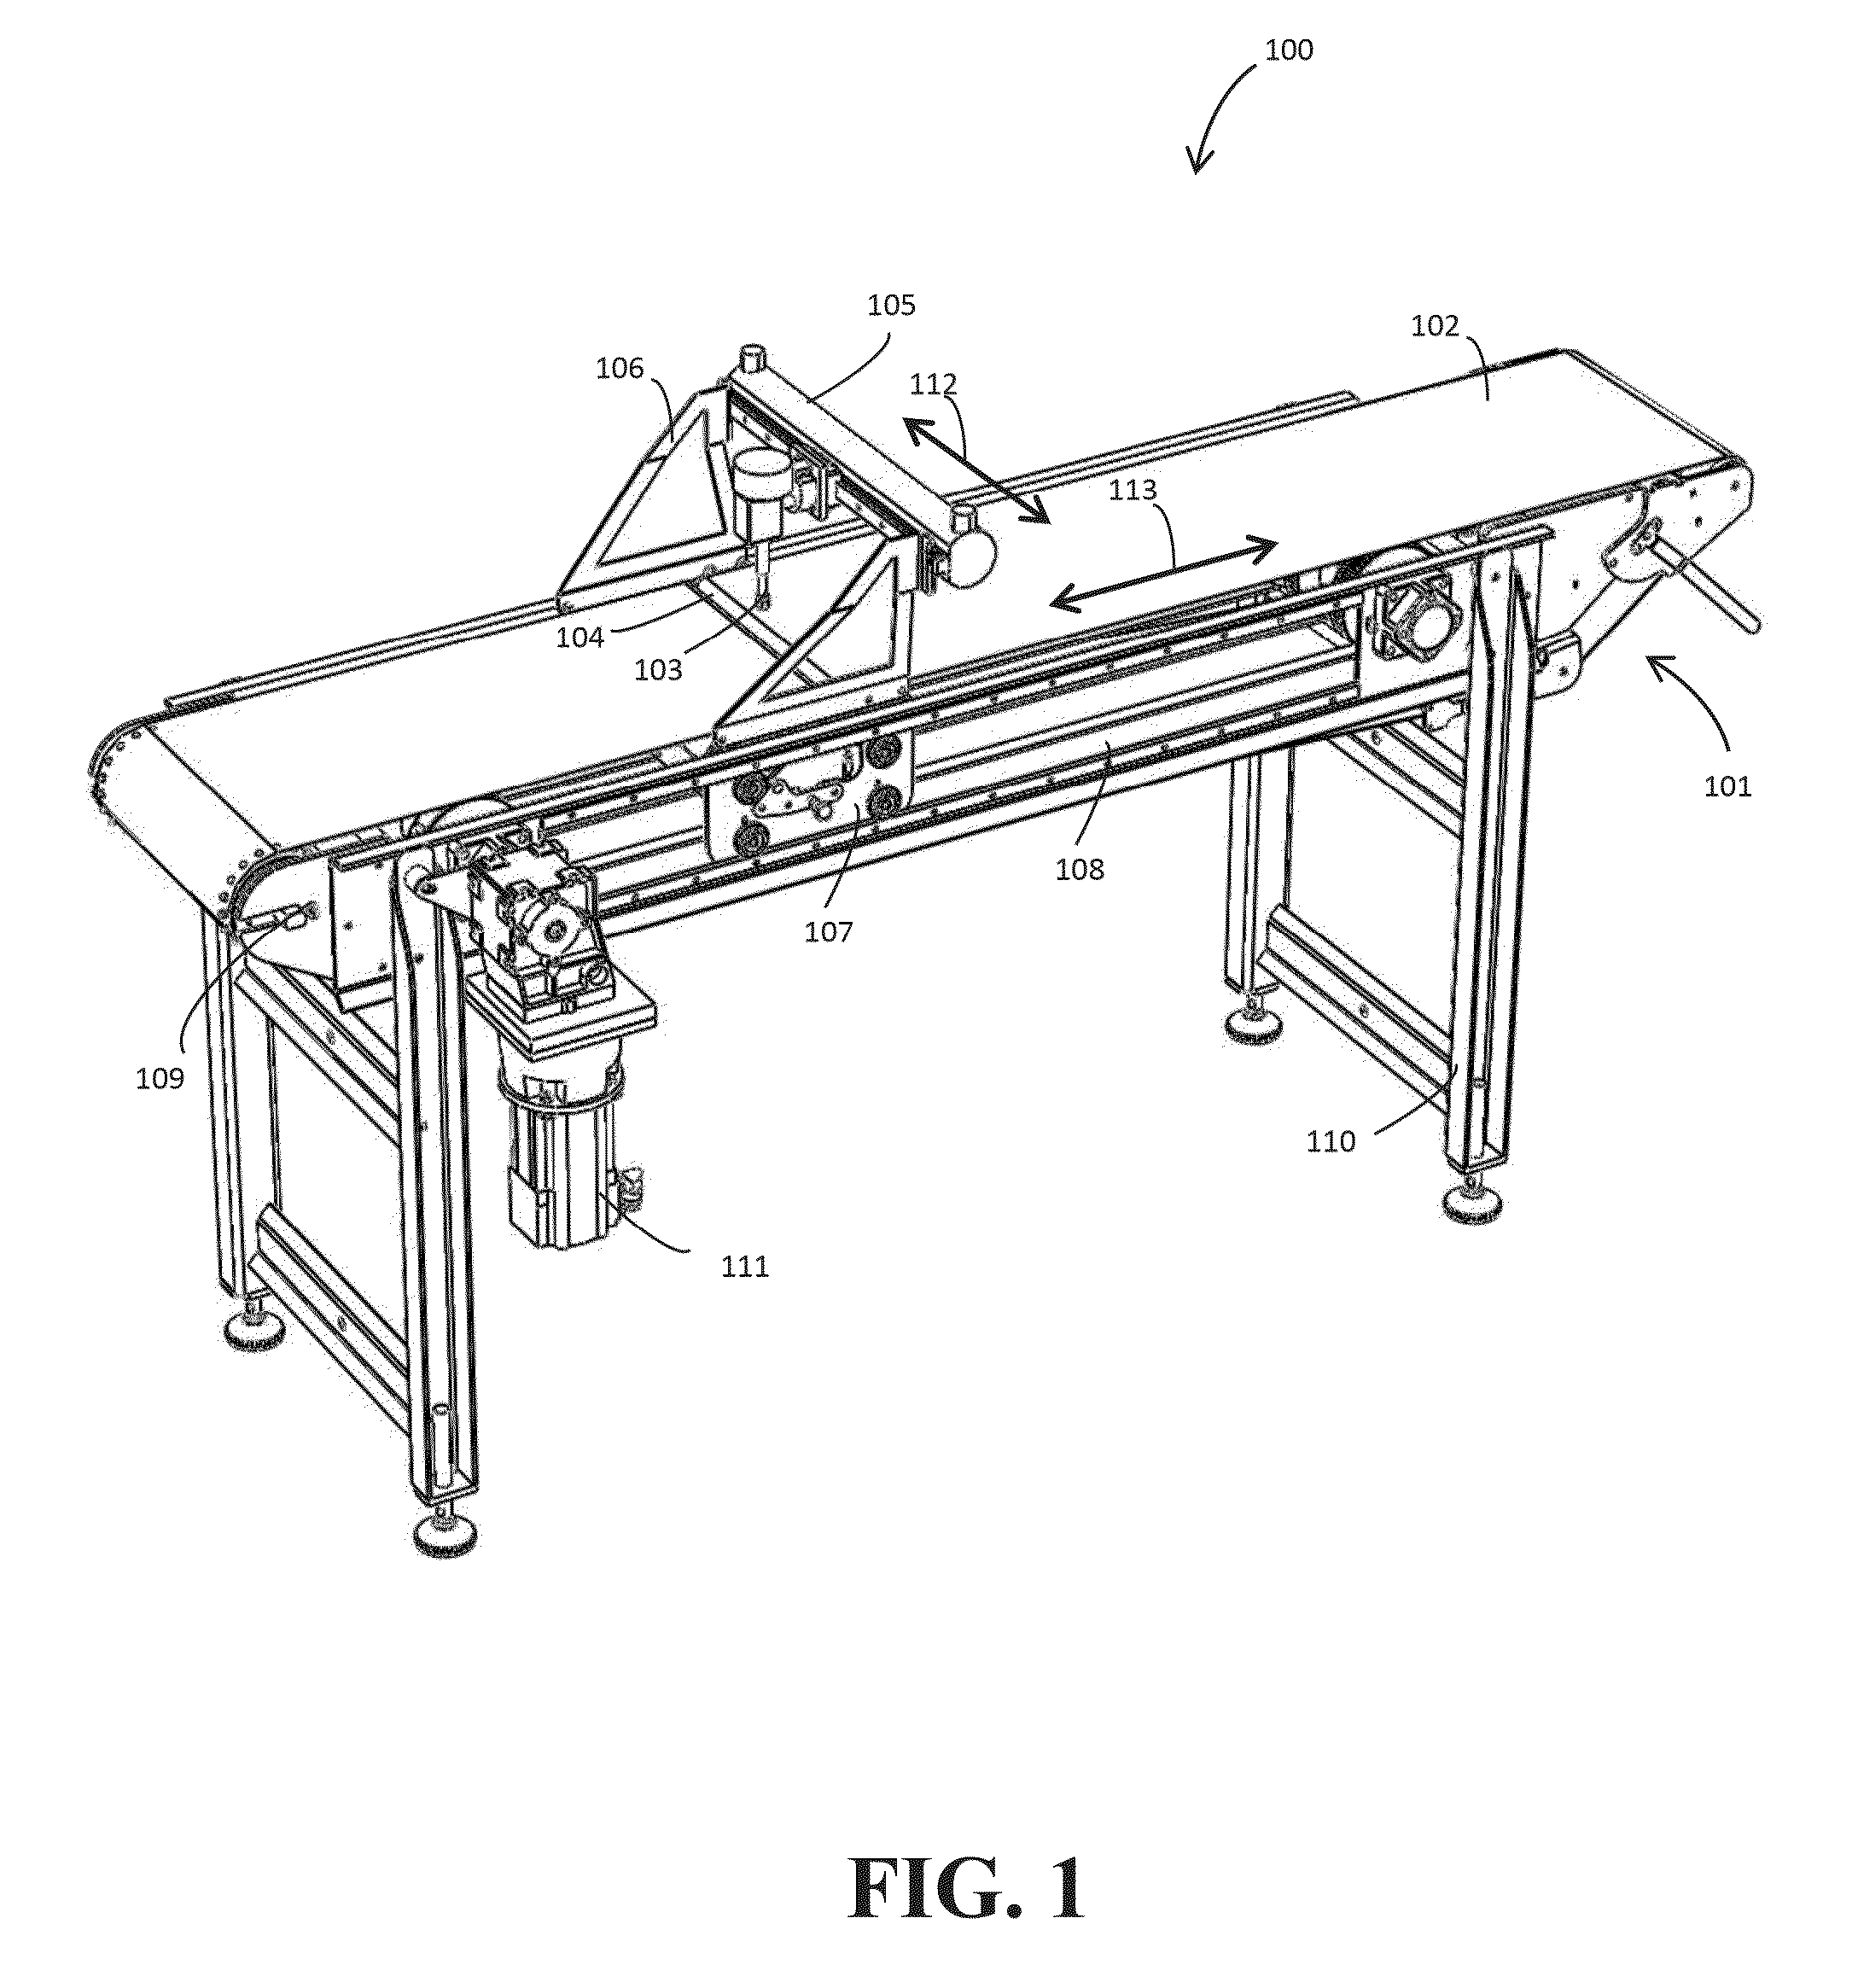 Cutting apparatus for cutting food items conveyed on a conveyor including at least one conveyor belt